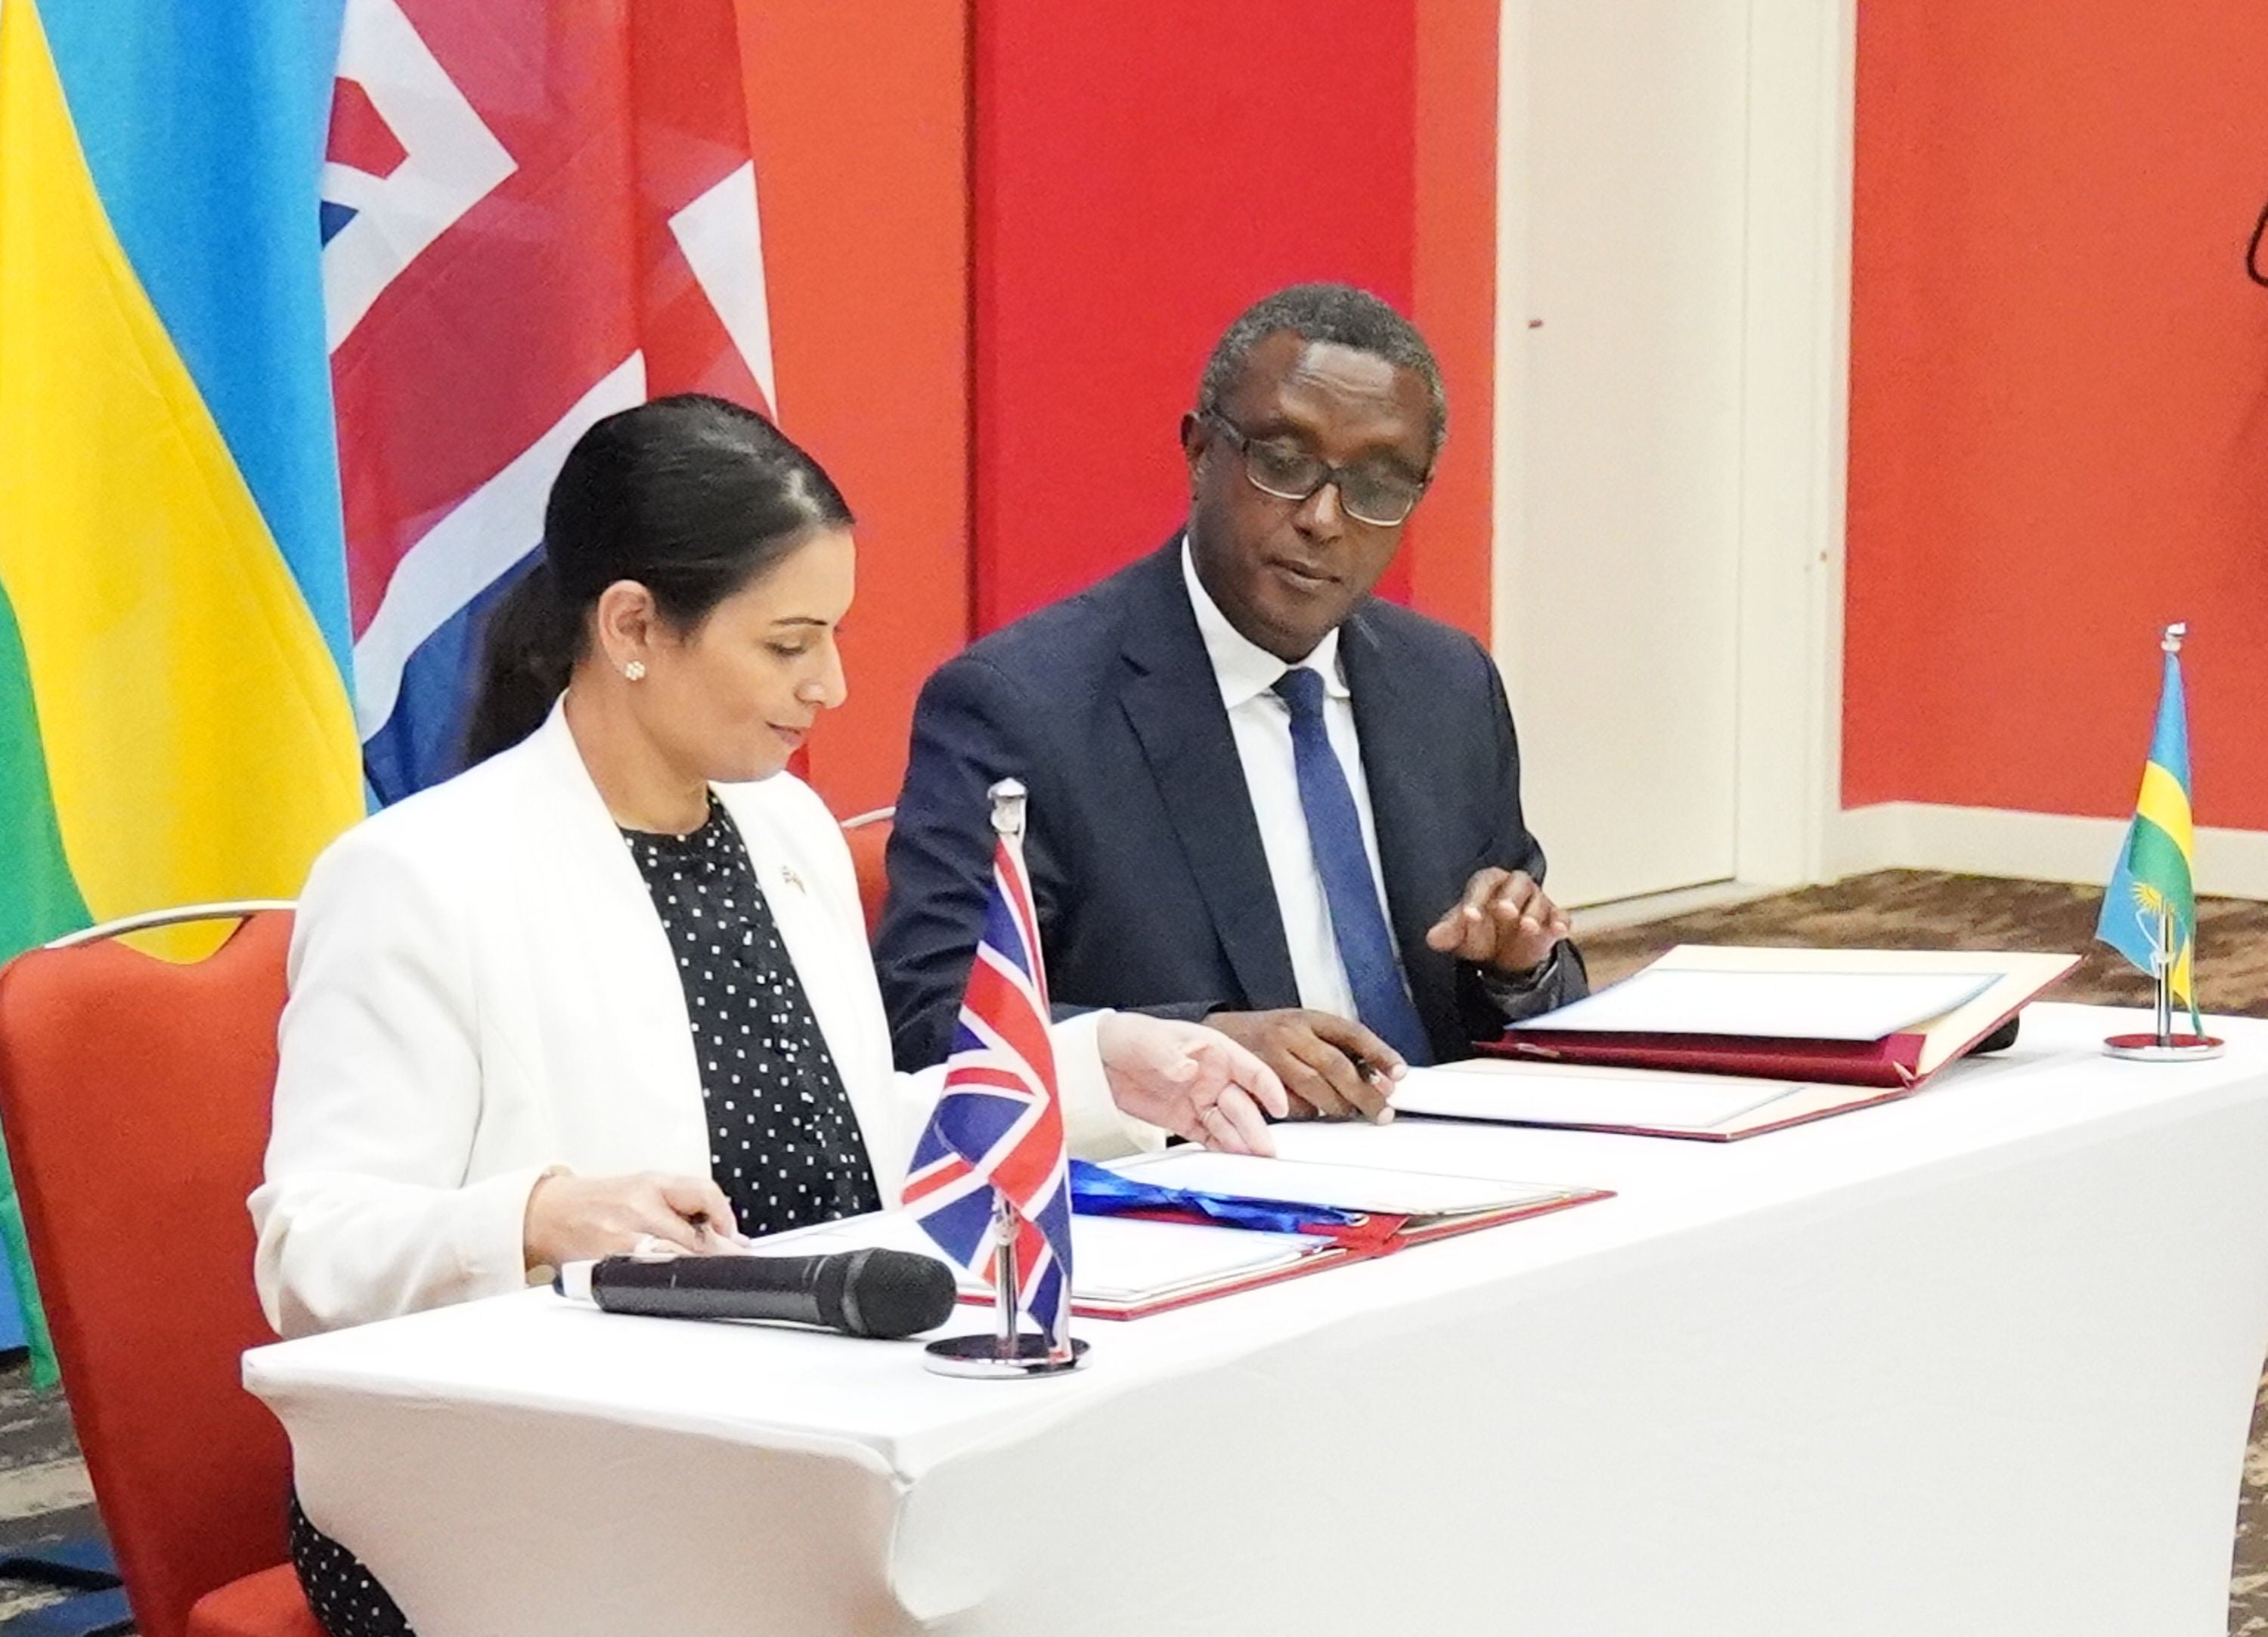 Home Secretary Priti Patel and Rwandan minister Vincent Biruta signed the migration partnership deal in the east African nation’s capital Kigali on Thursday (Flora Thompson/PA)